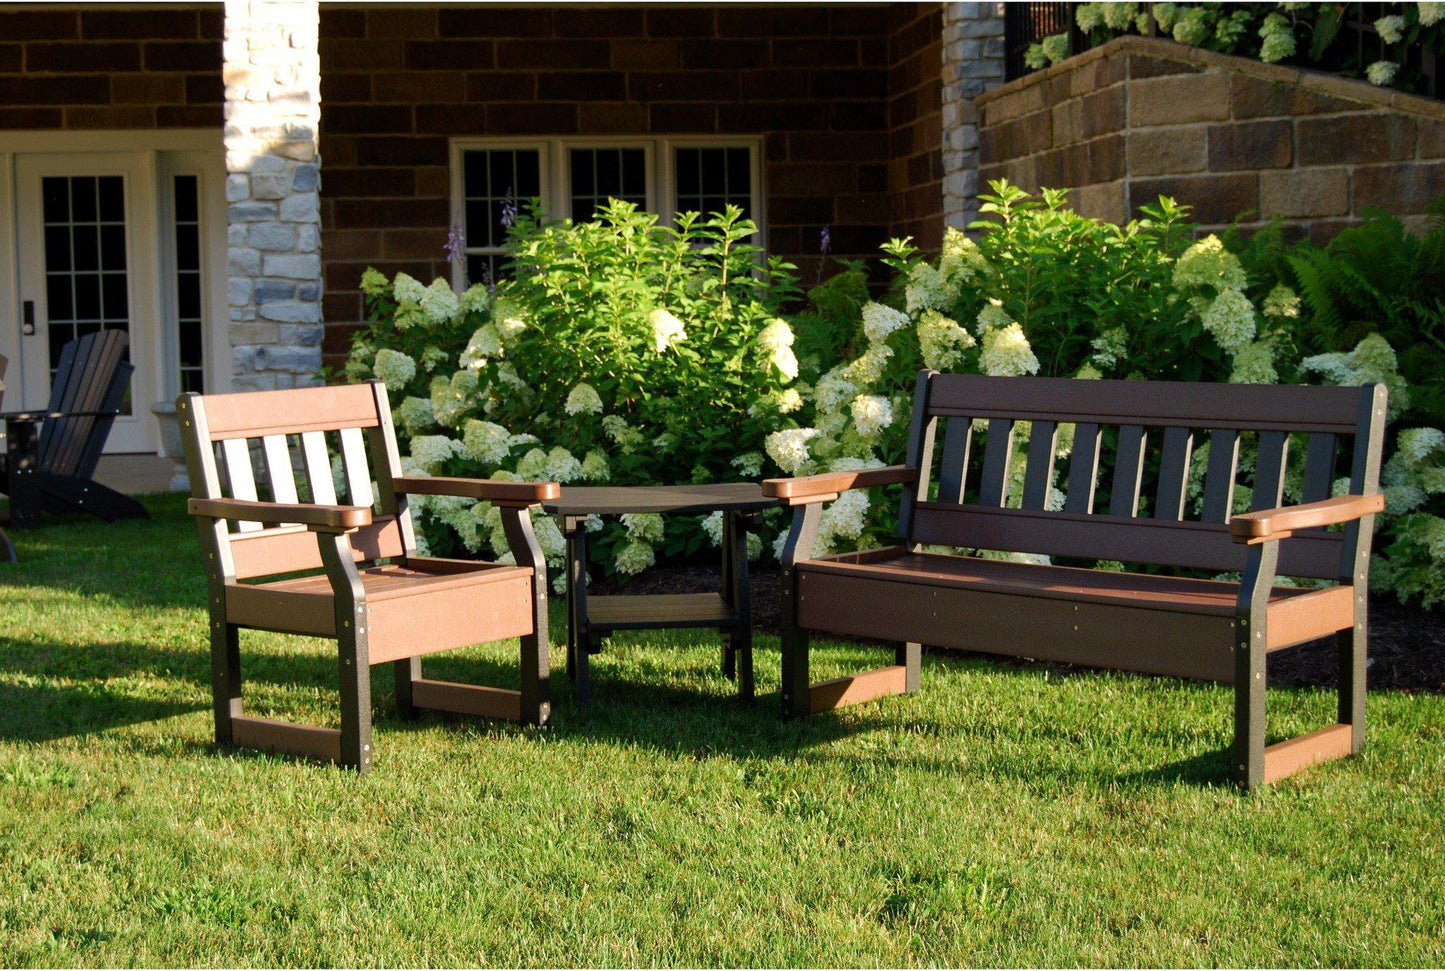 Wildridge Recycled Plastic Heritage 52.5" Wide Garden Bench (QUICK SHIP) - LEAD TIME TO SHIP 3 TO 4 BUSINESS DAYS